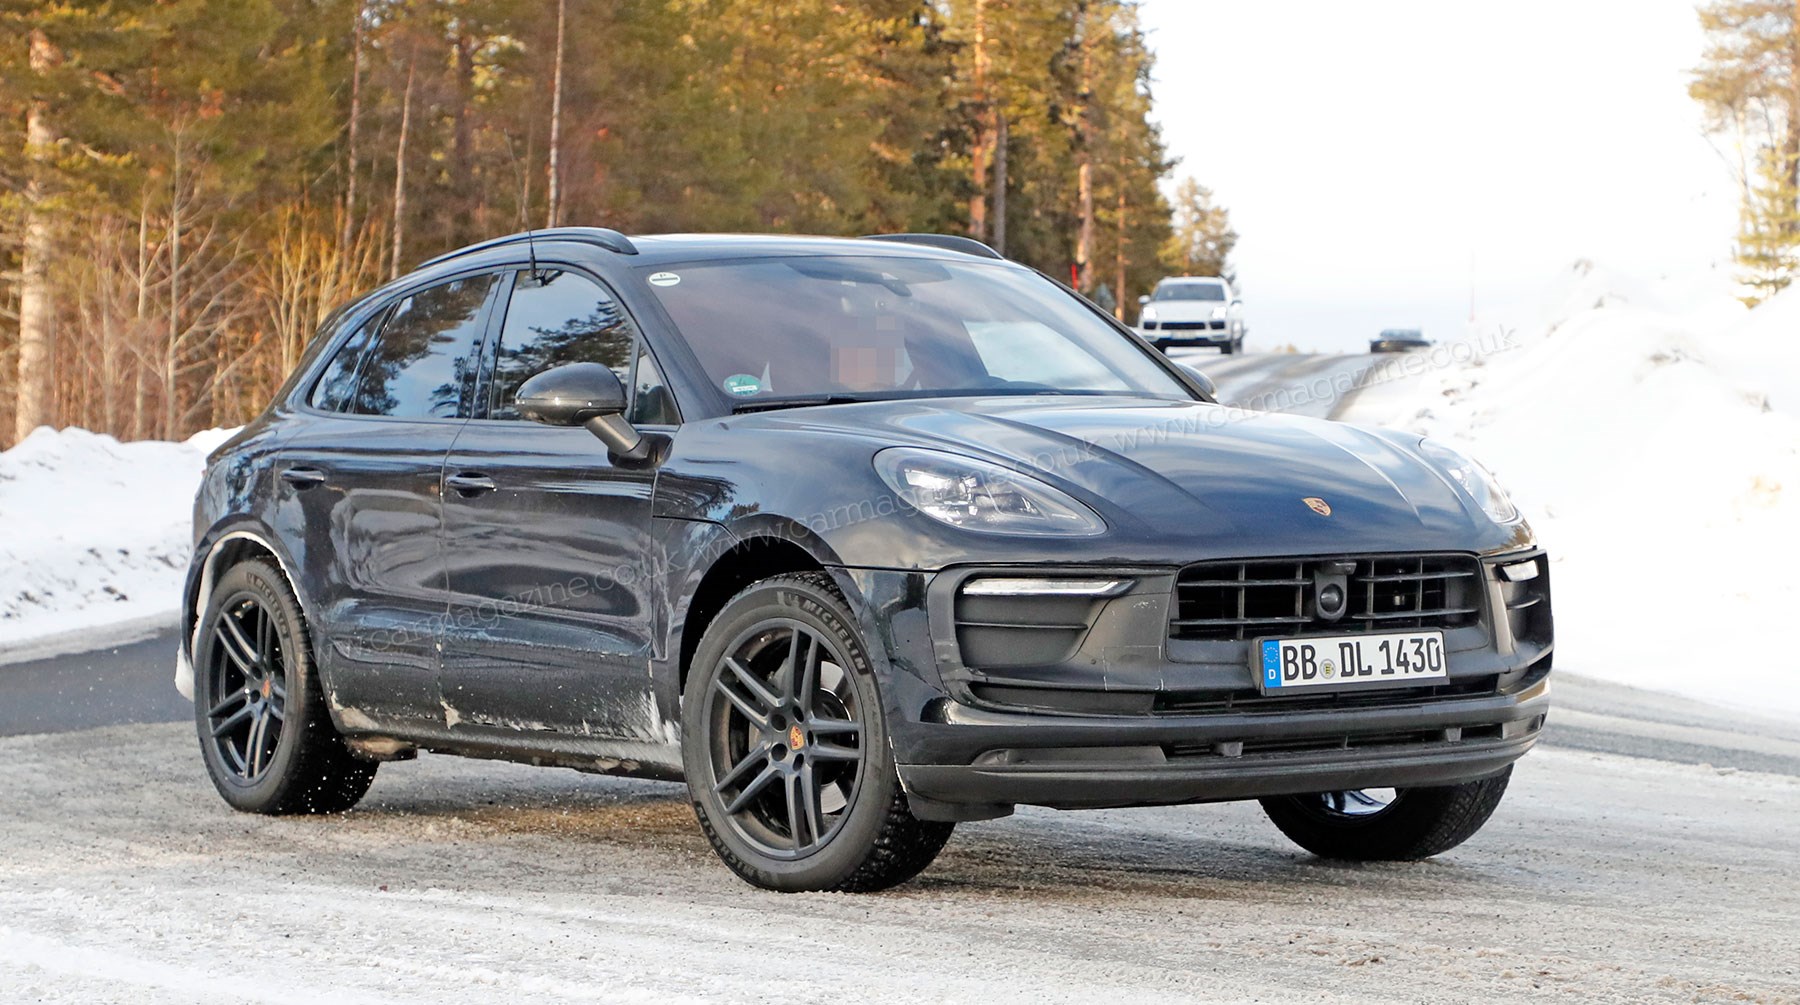 Porsche Macan: Next Generation SUV to Be All Electric